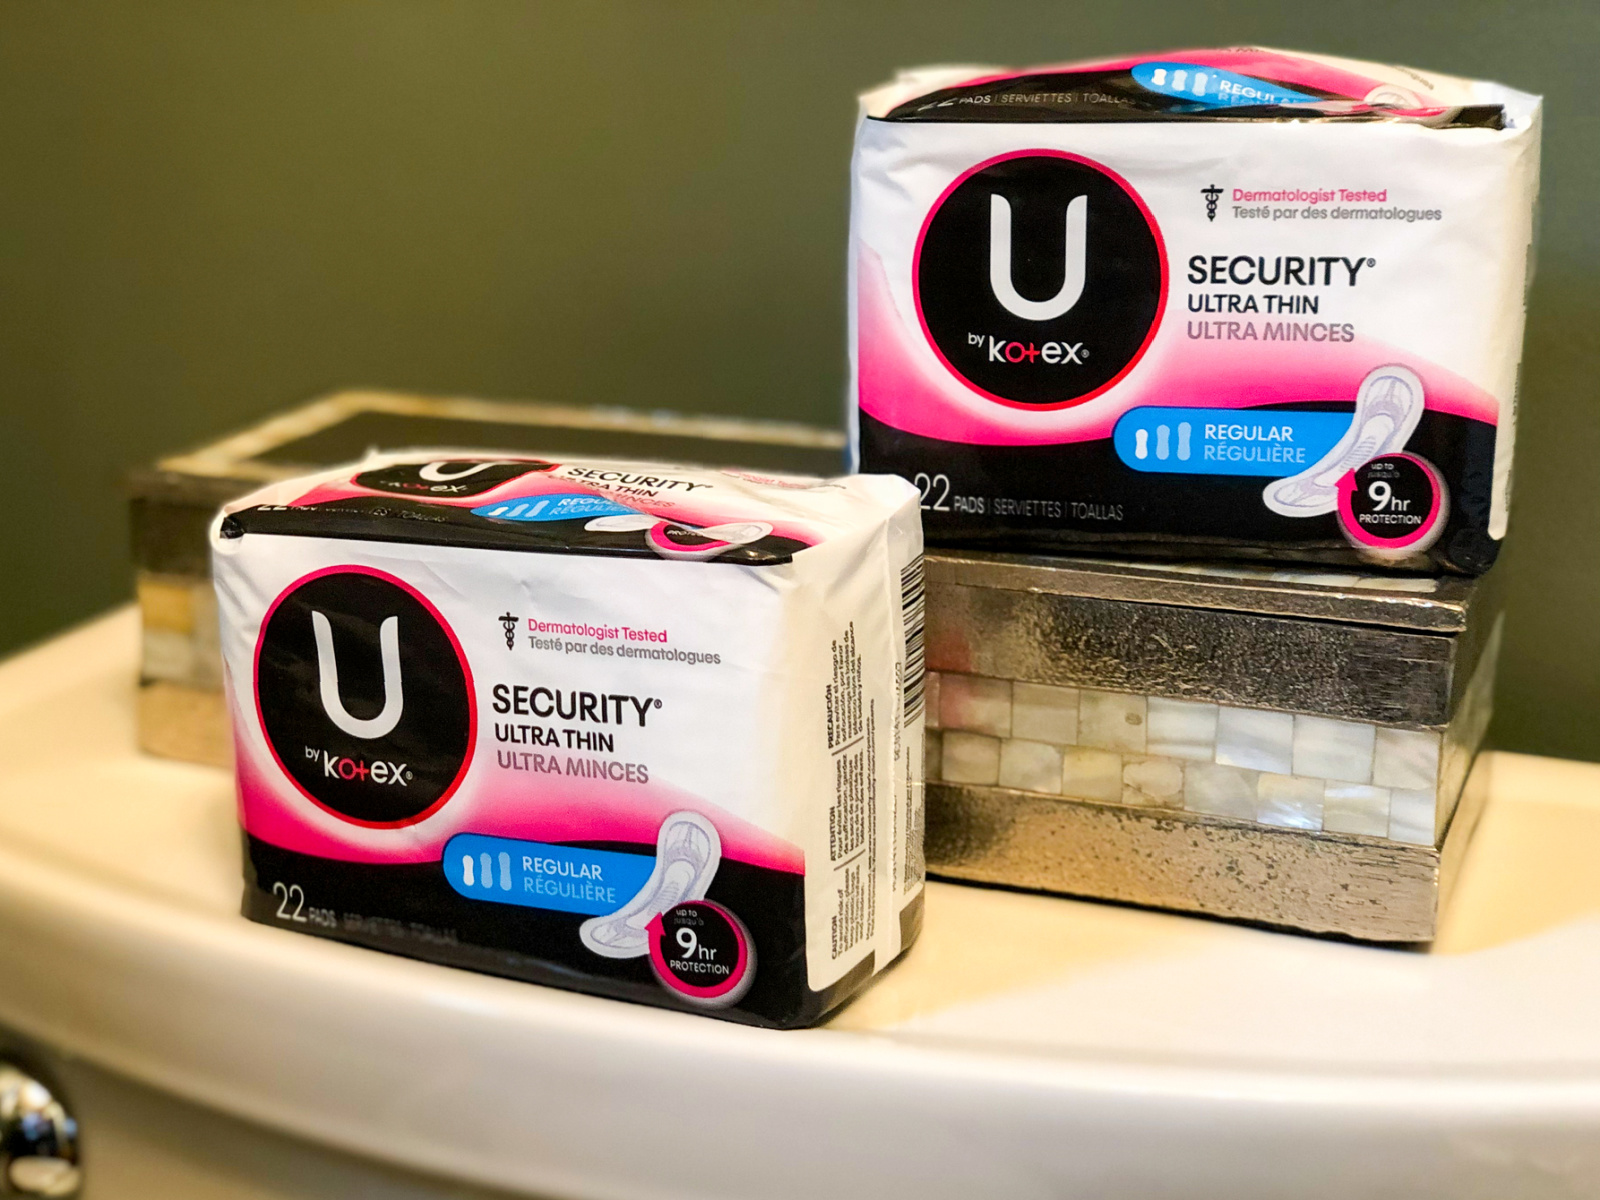 U by Kotex Products As Low As FREE At Publix